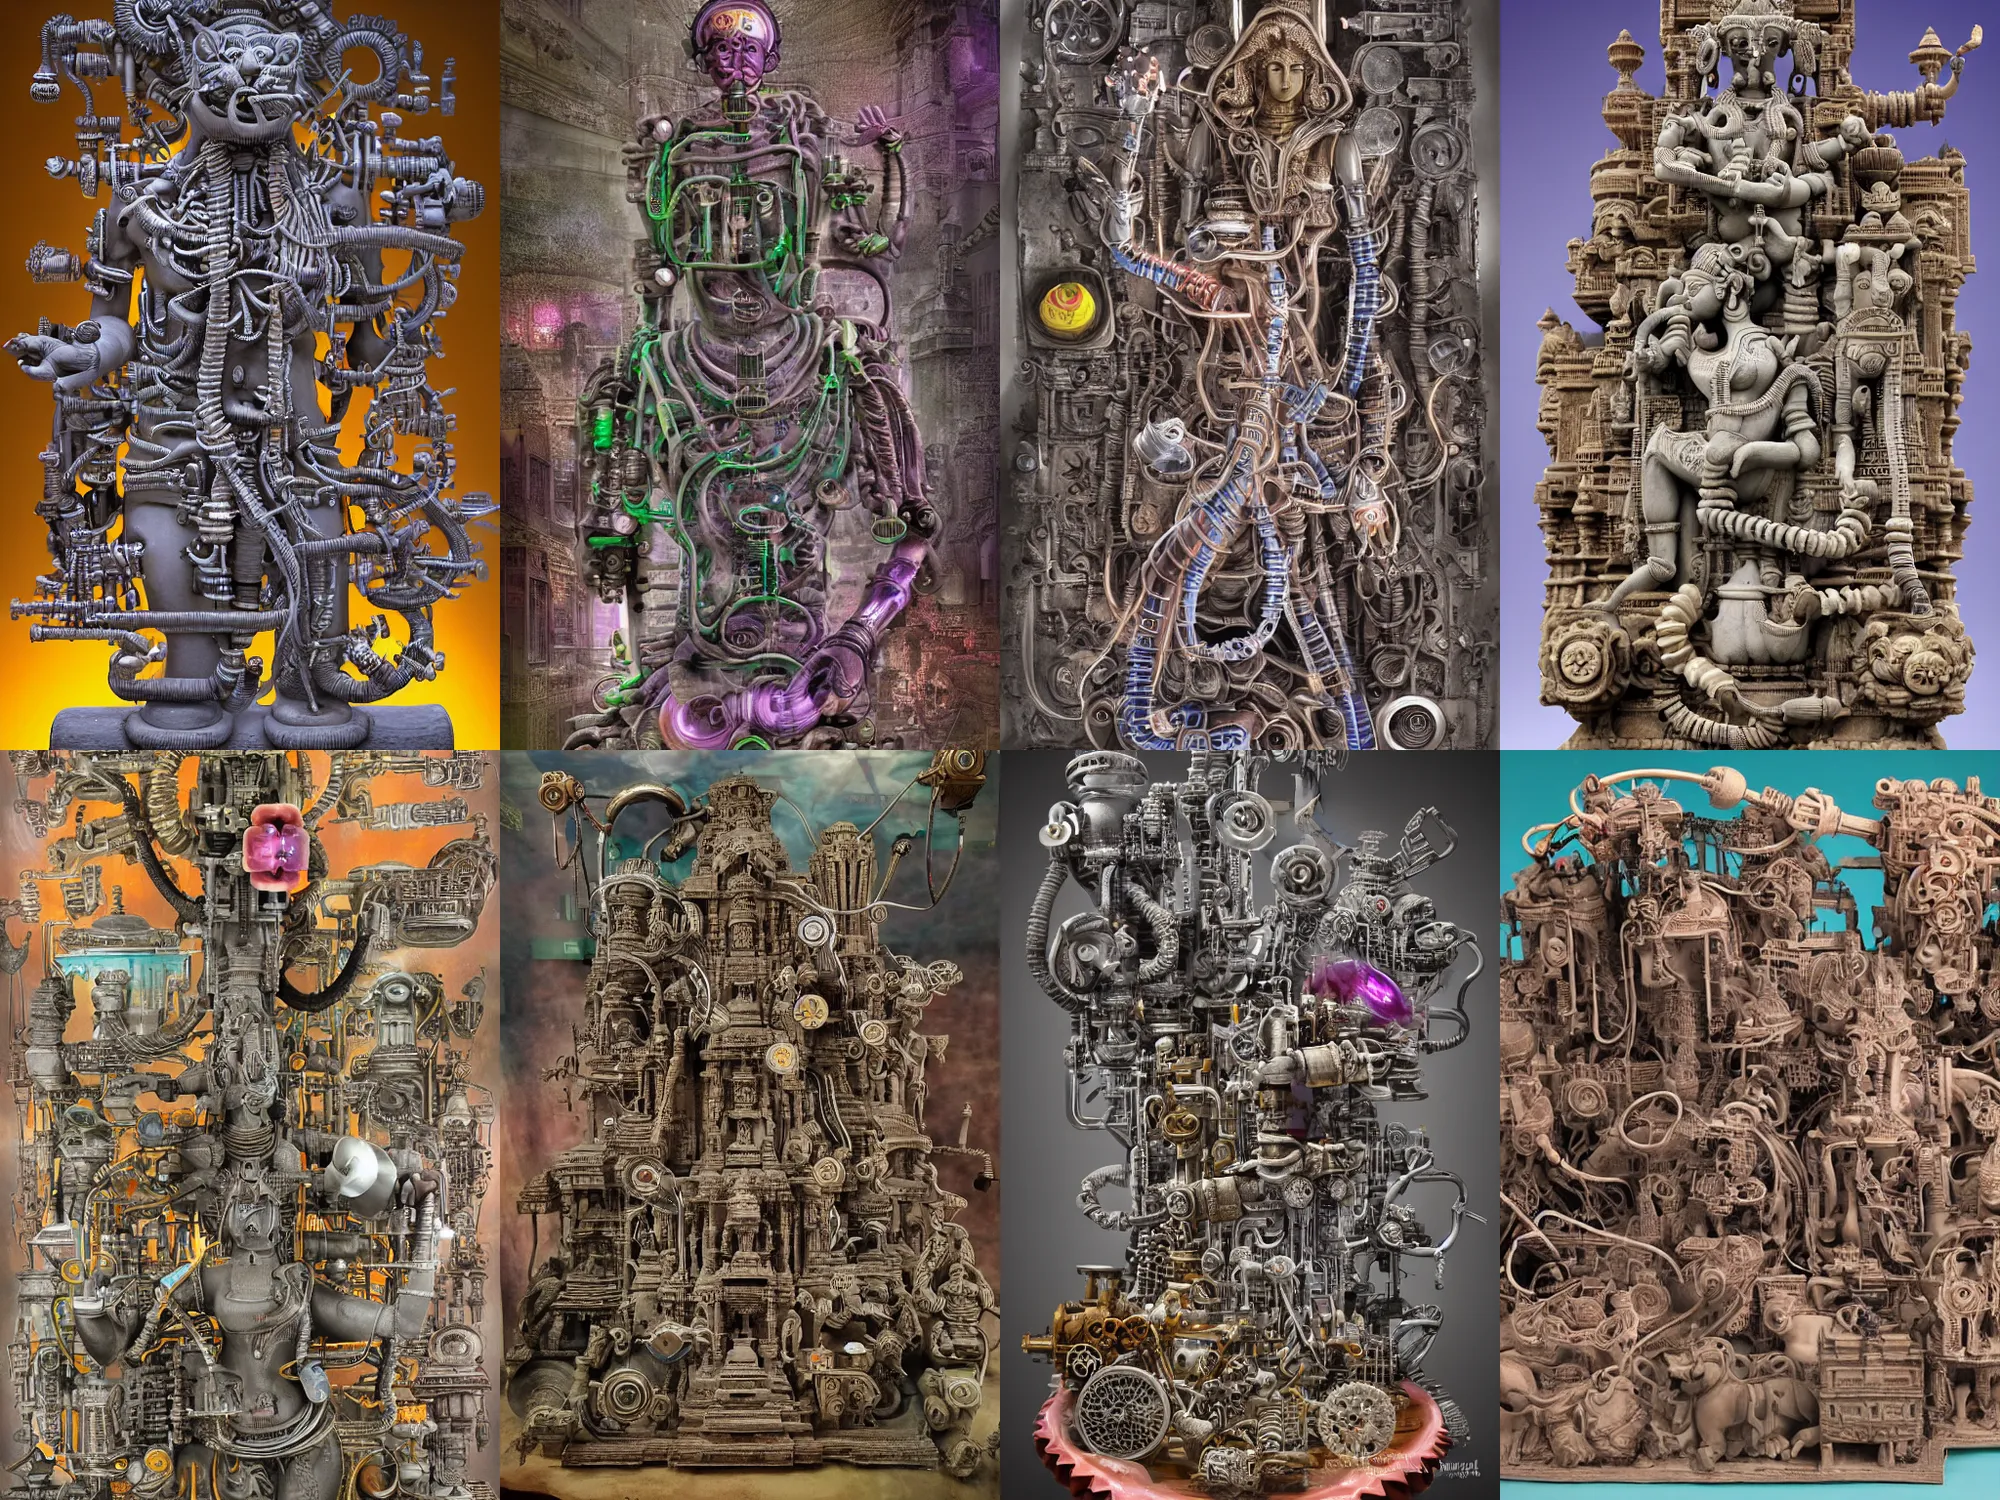 Prompt: at Khajuraho, steam, smoke, dust, godes, made from electric condensators Shiva, veins, vibrant, xray, flat shaped chrome relief, fossil, MINIATURE CITY, mechanic bionic fungus flower cyberpunk cat mechabot, by david lachapelle, maze, tubes, joints, buttons, gears, relief by Goga Tandashvili, by jonas burgert, by Wayne Barlowe, cinematic